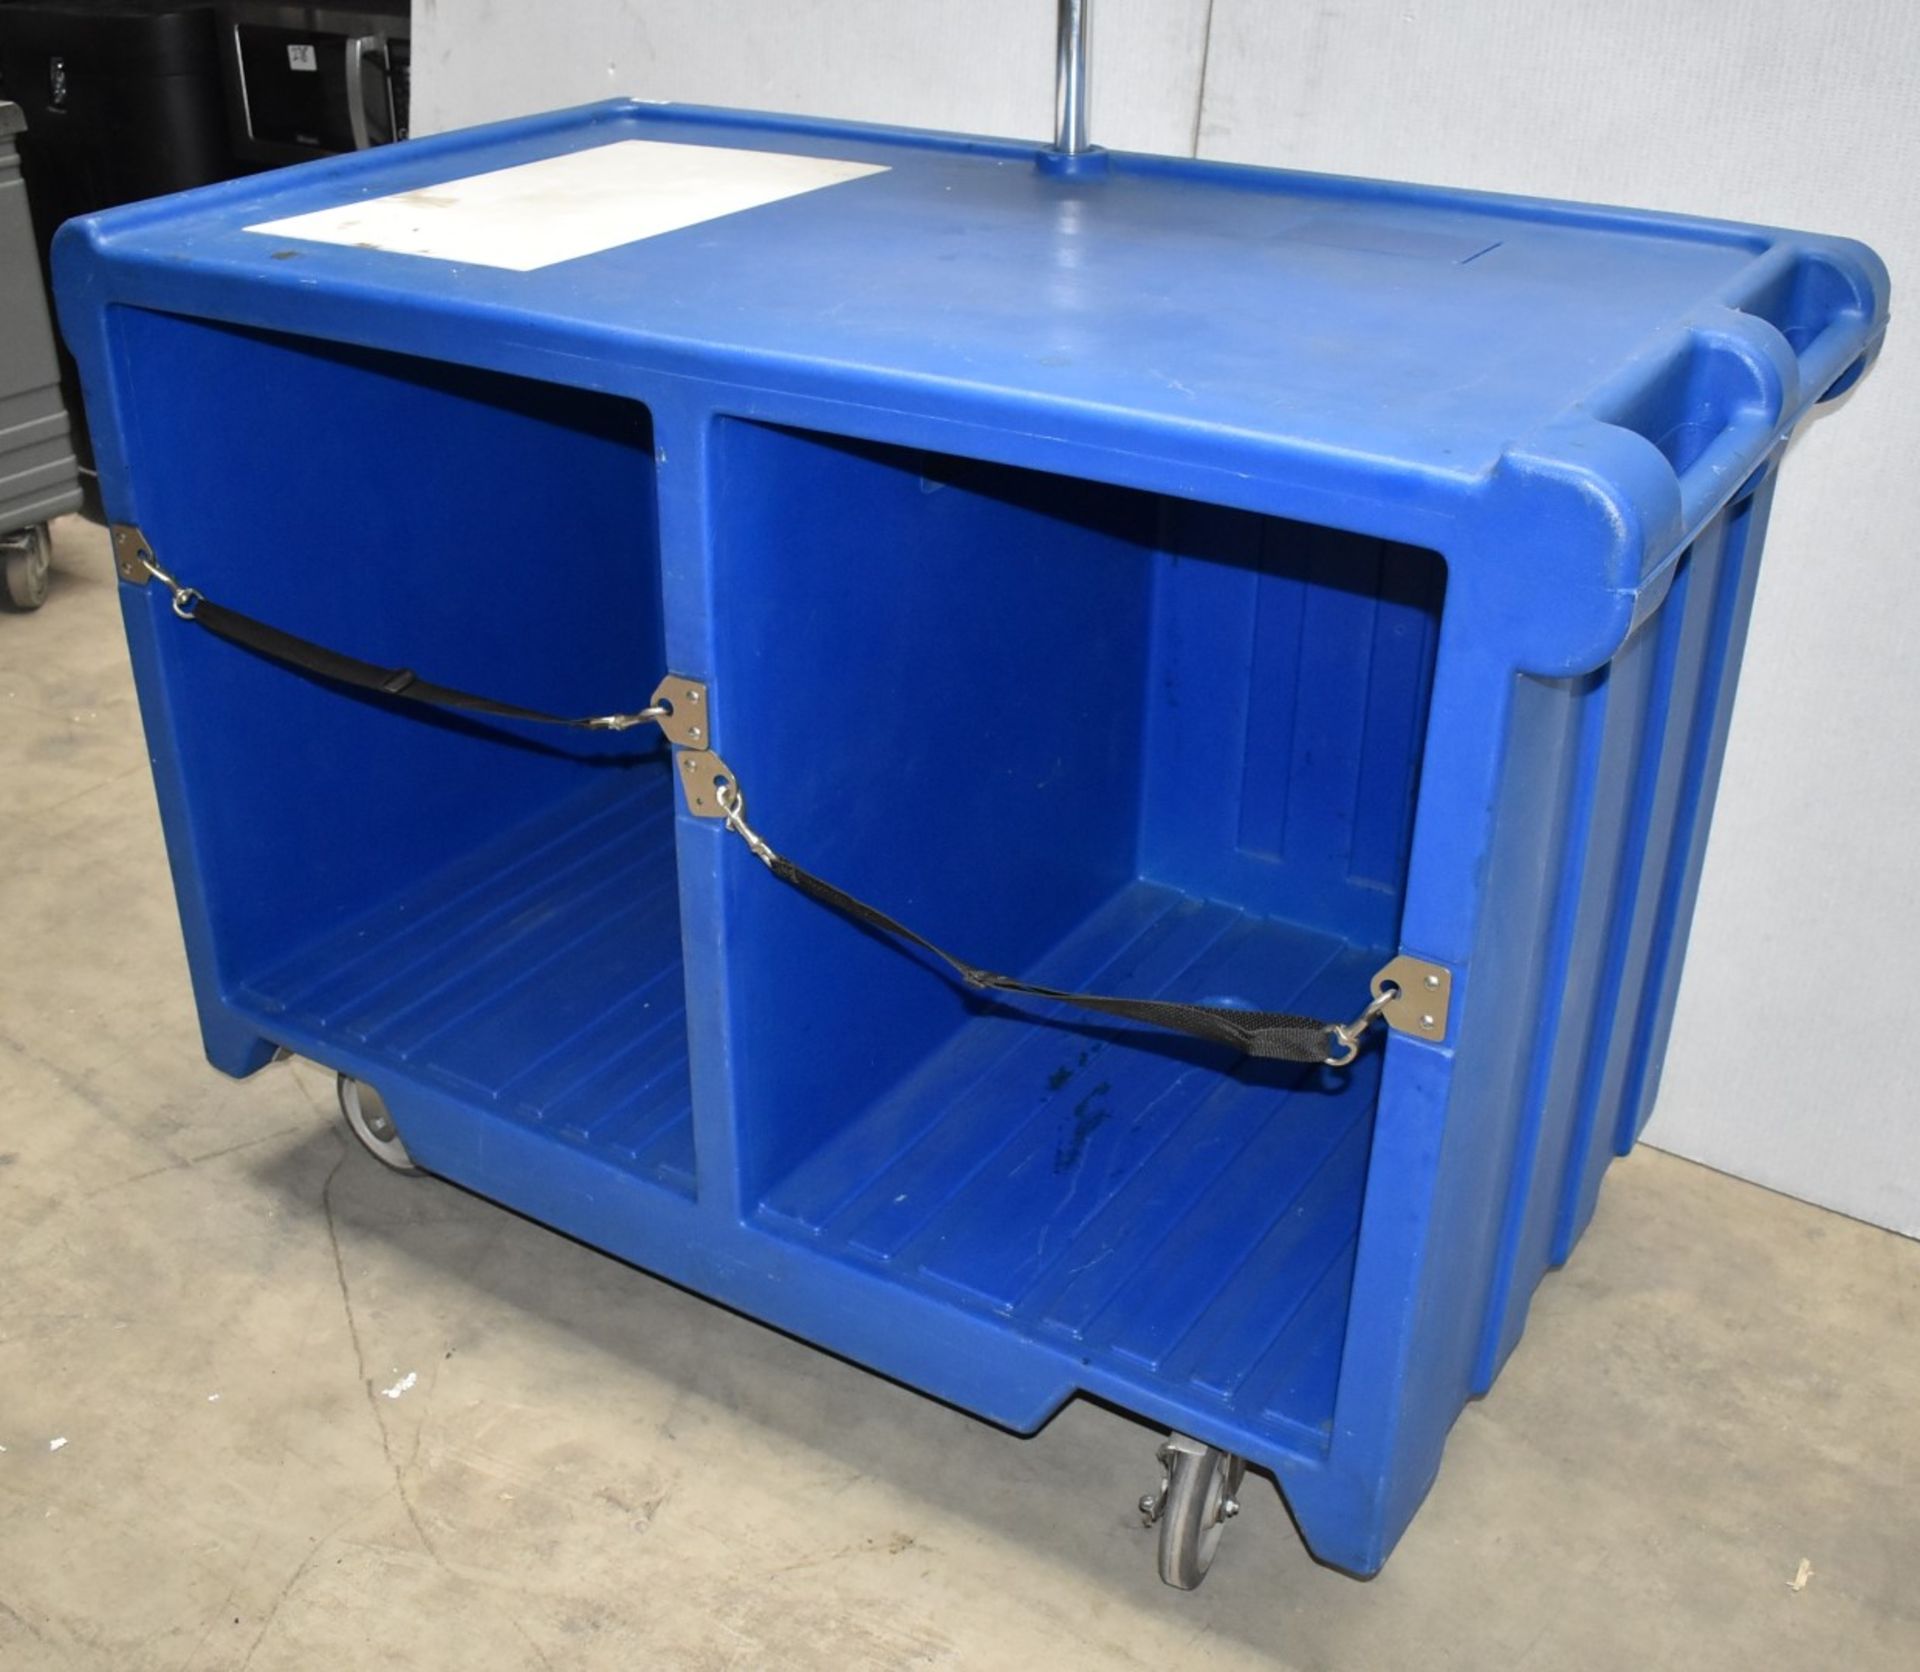 1 x Cambro Mobile BBQ Food Station With Parasol - Lightweight Plastic Design With Storage - Image 4 of 14